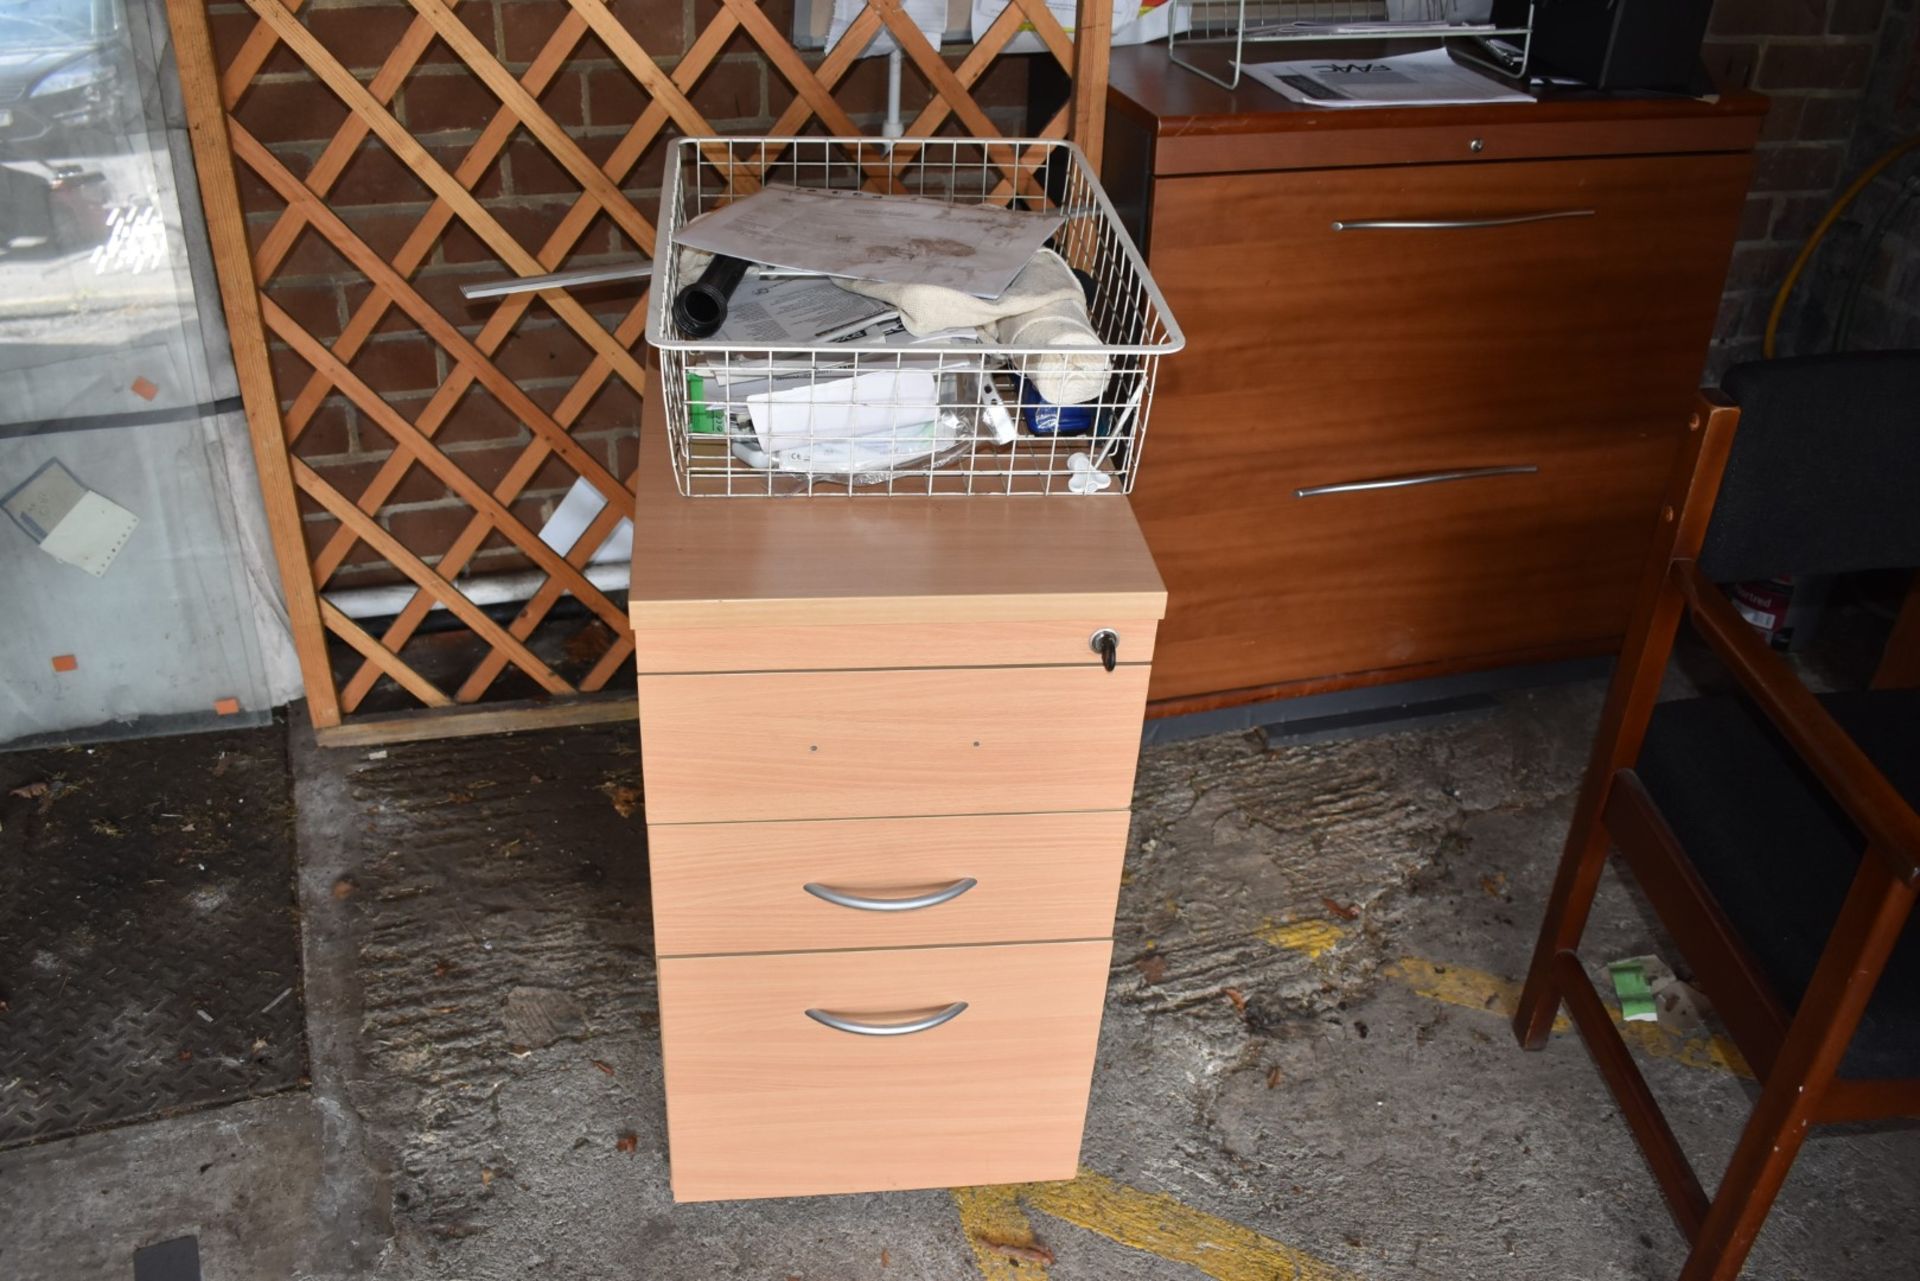 1 x Assorted Collection to Include Desk, Drawers, Filing Unit, Chair, Notice Board, Trellis, - Image 6 of 8